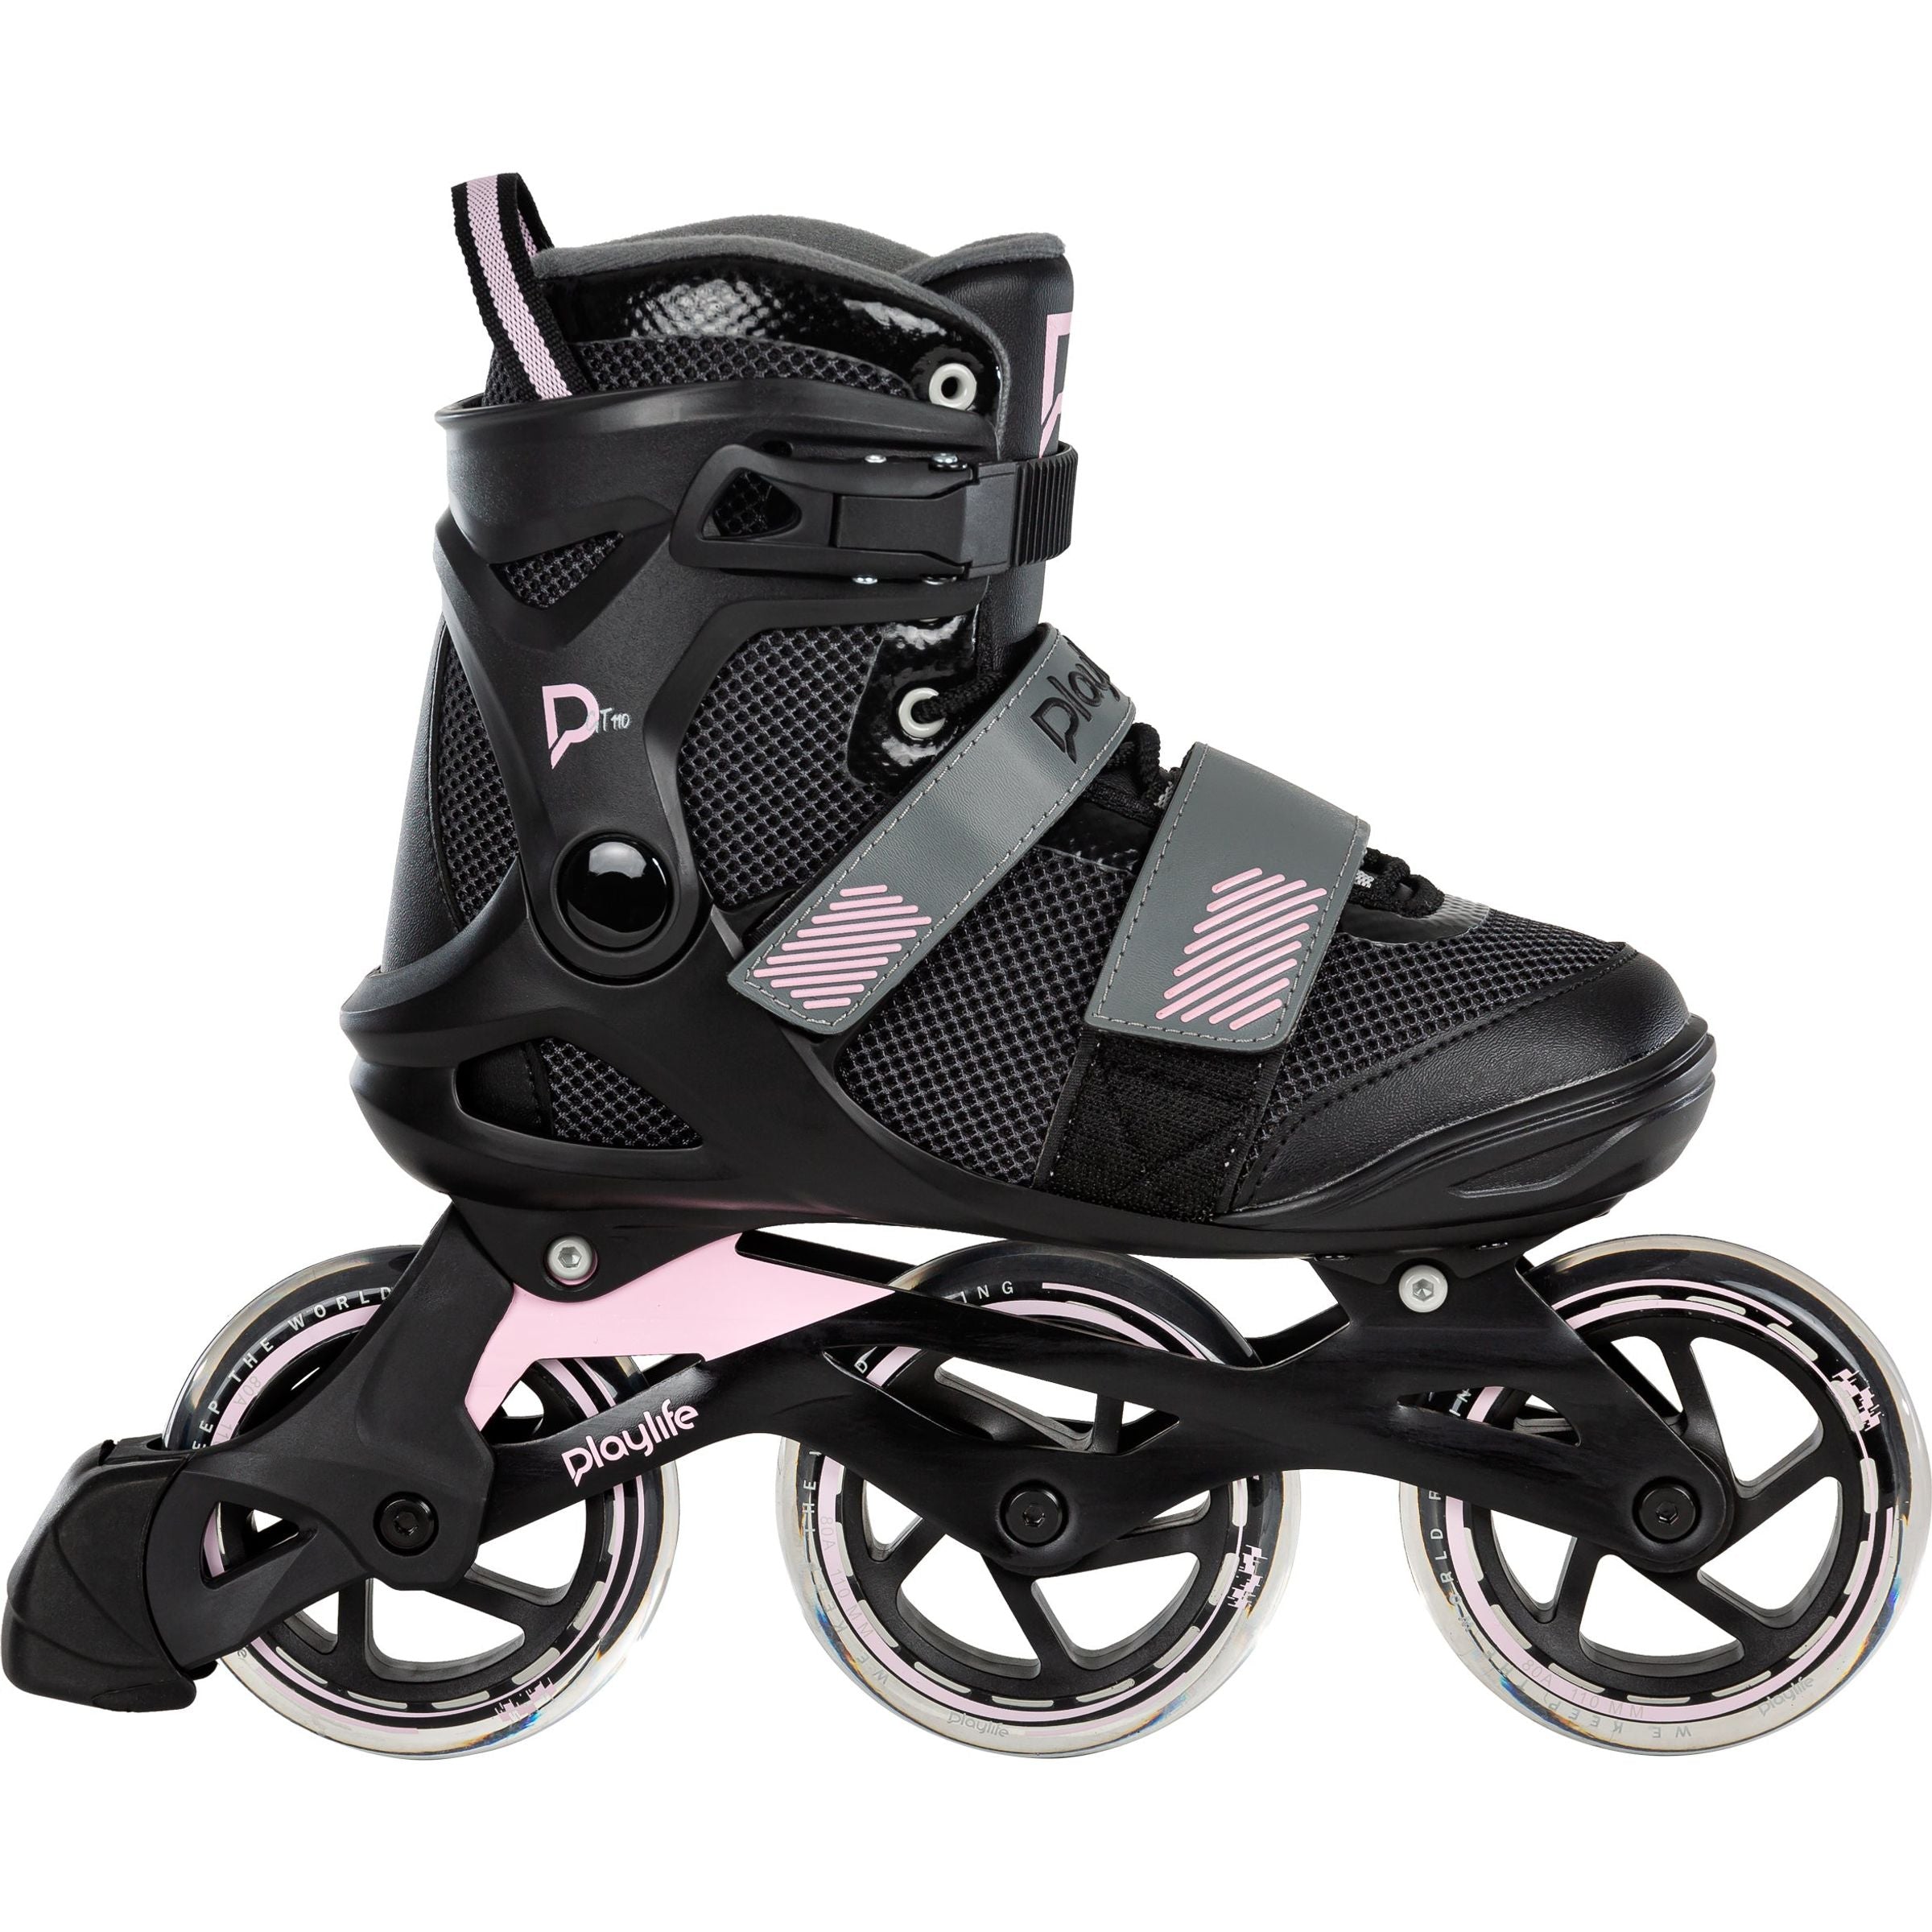 Playlife GT Pink 110